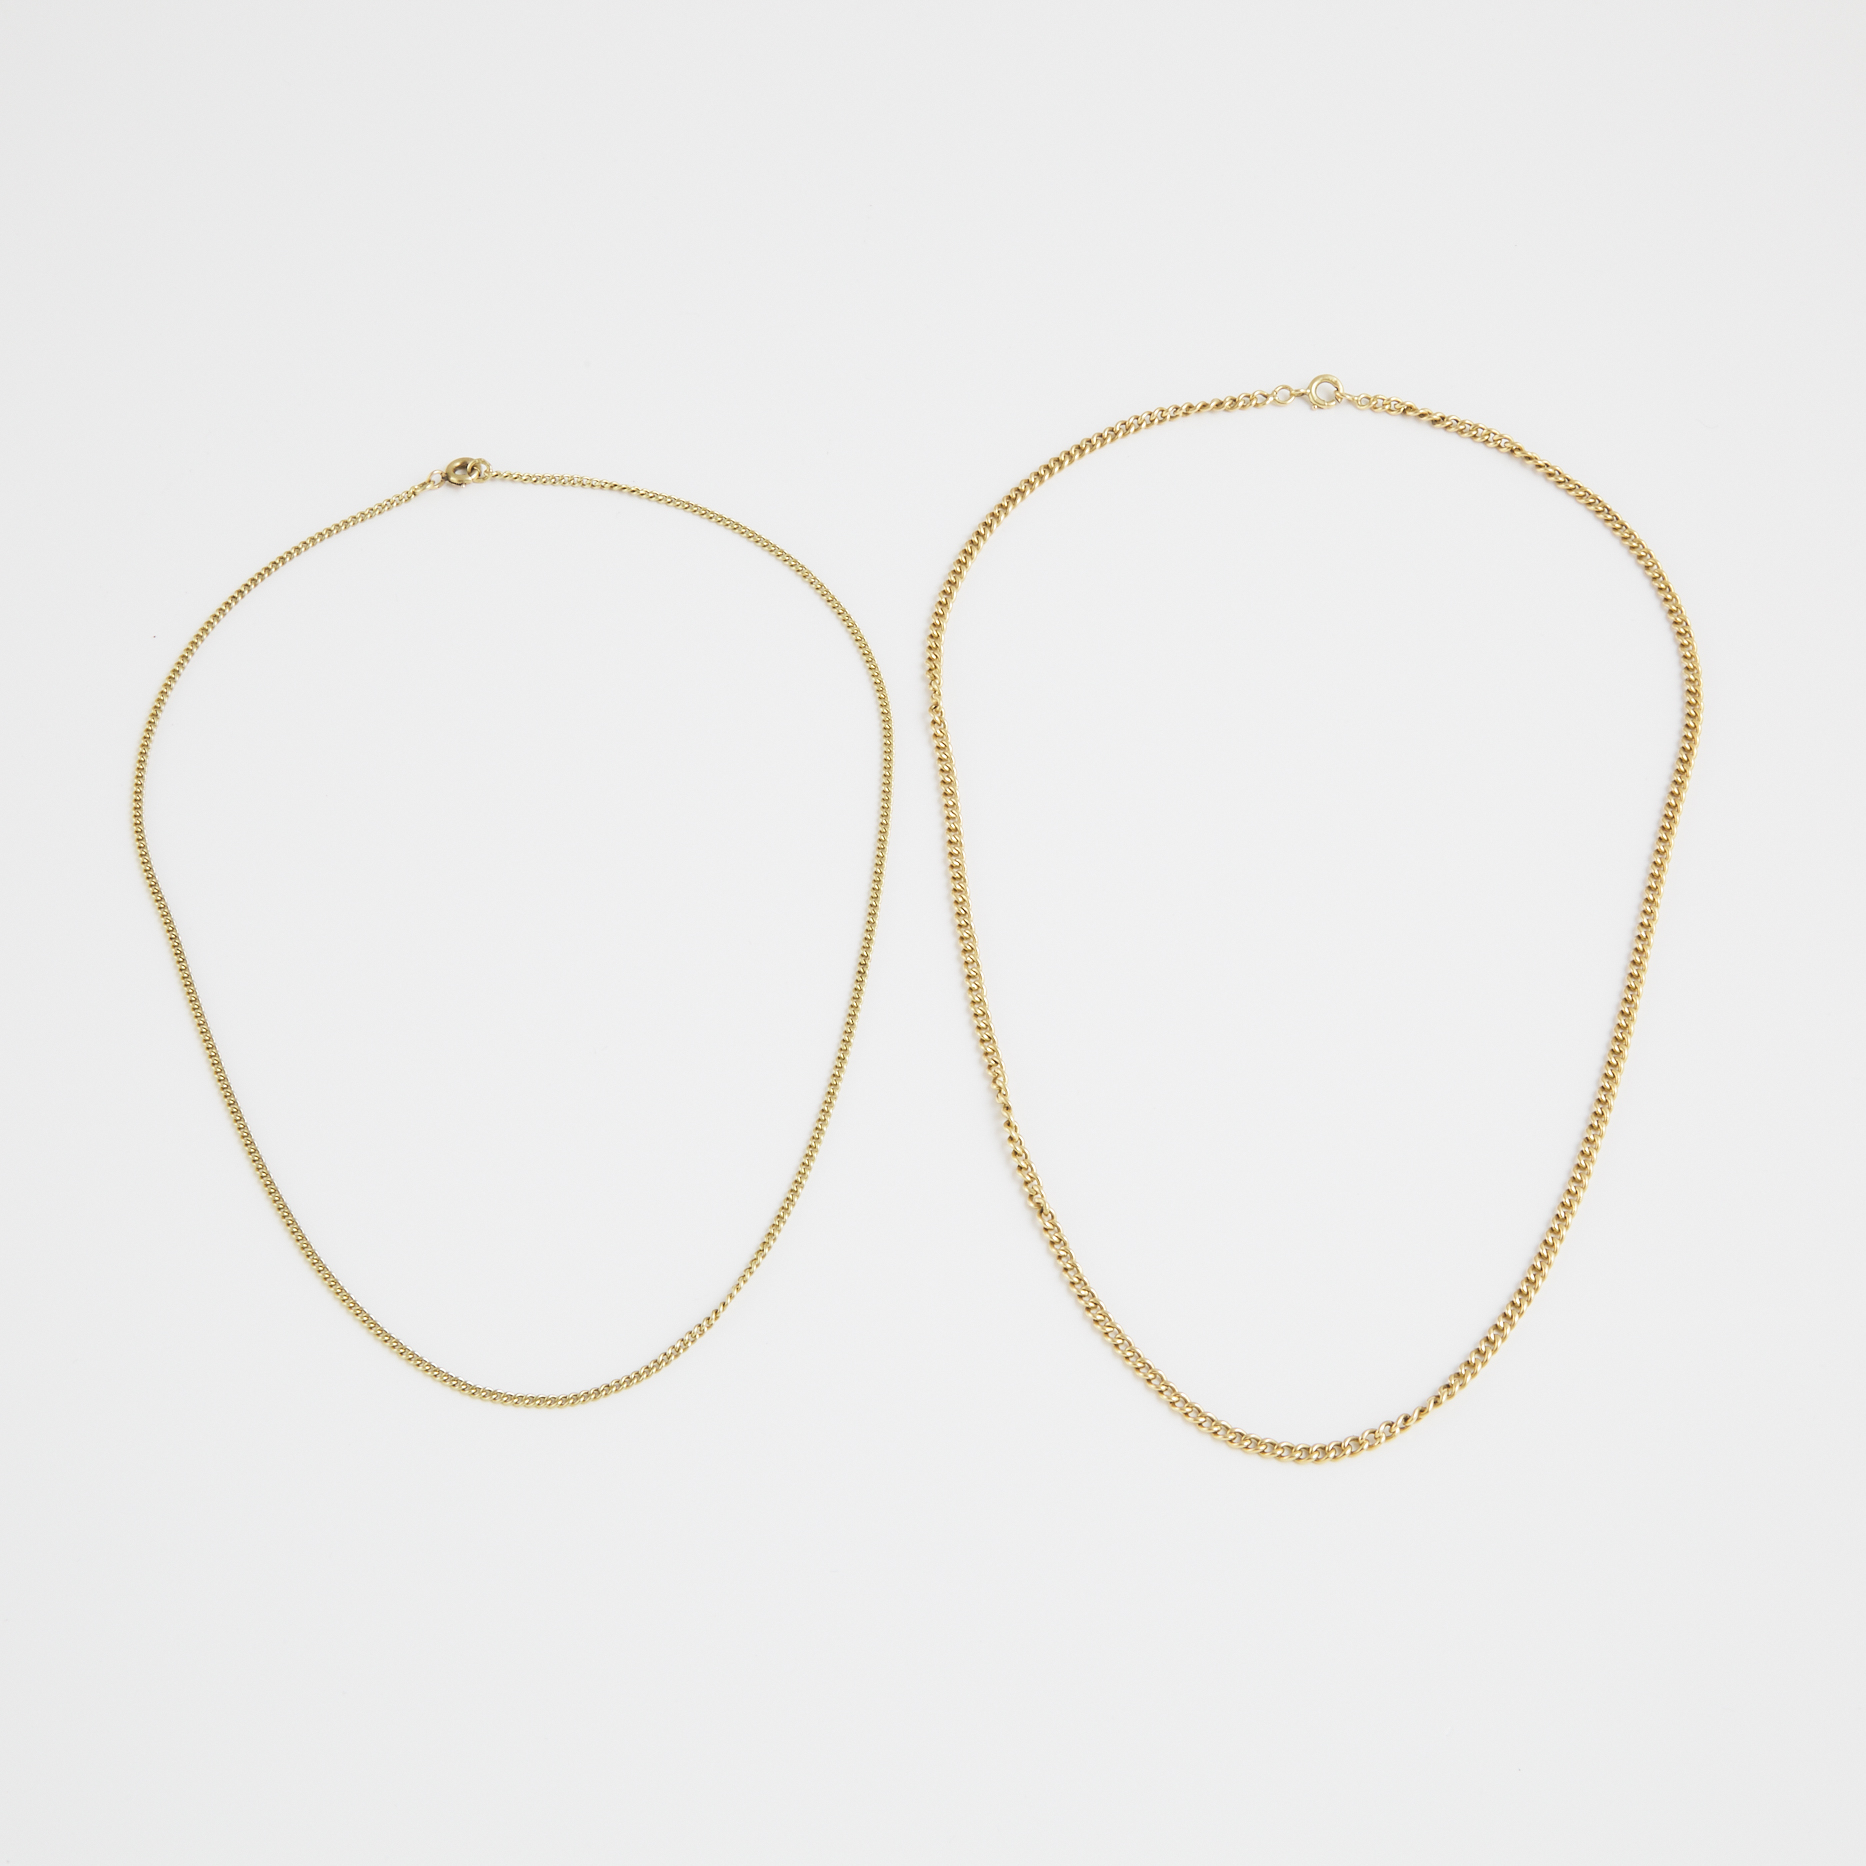 2 x French 18k Yellow Gold Chains